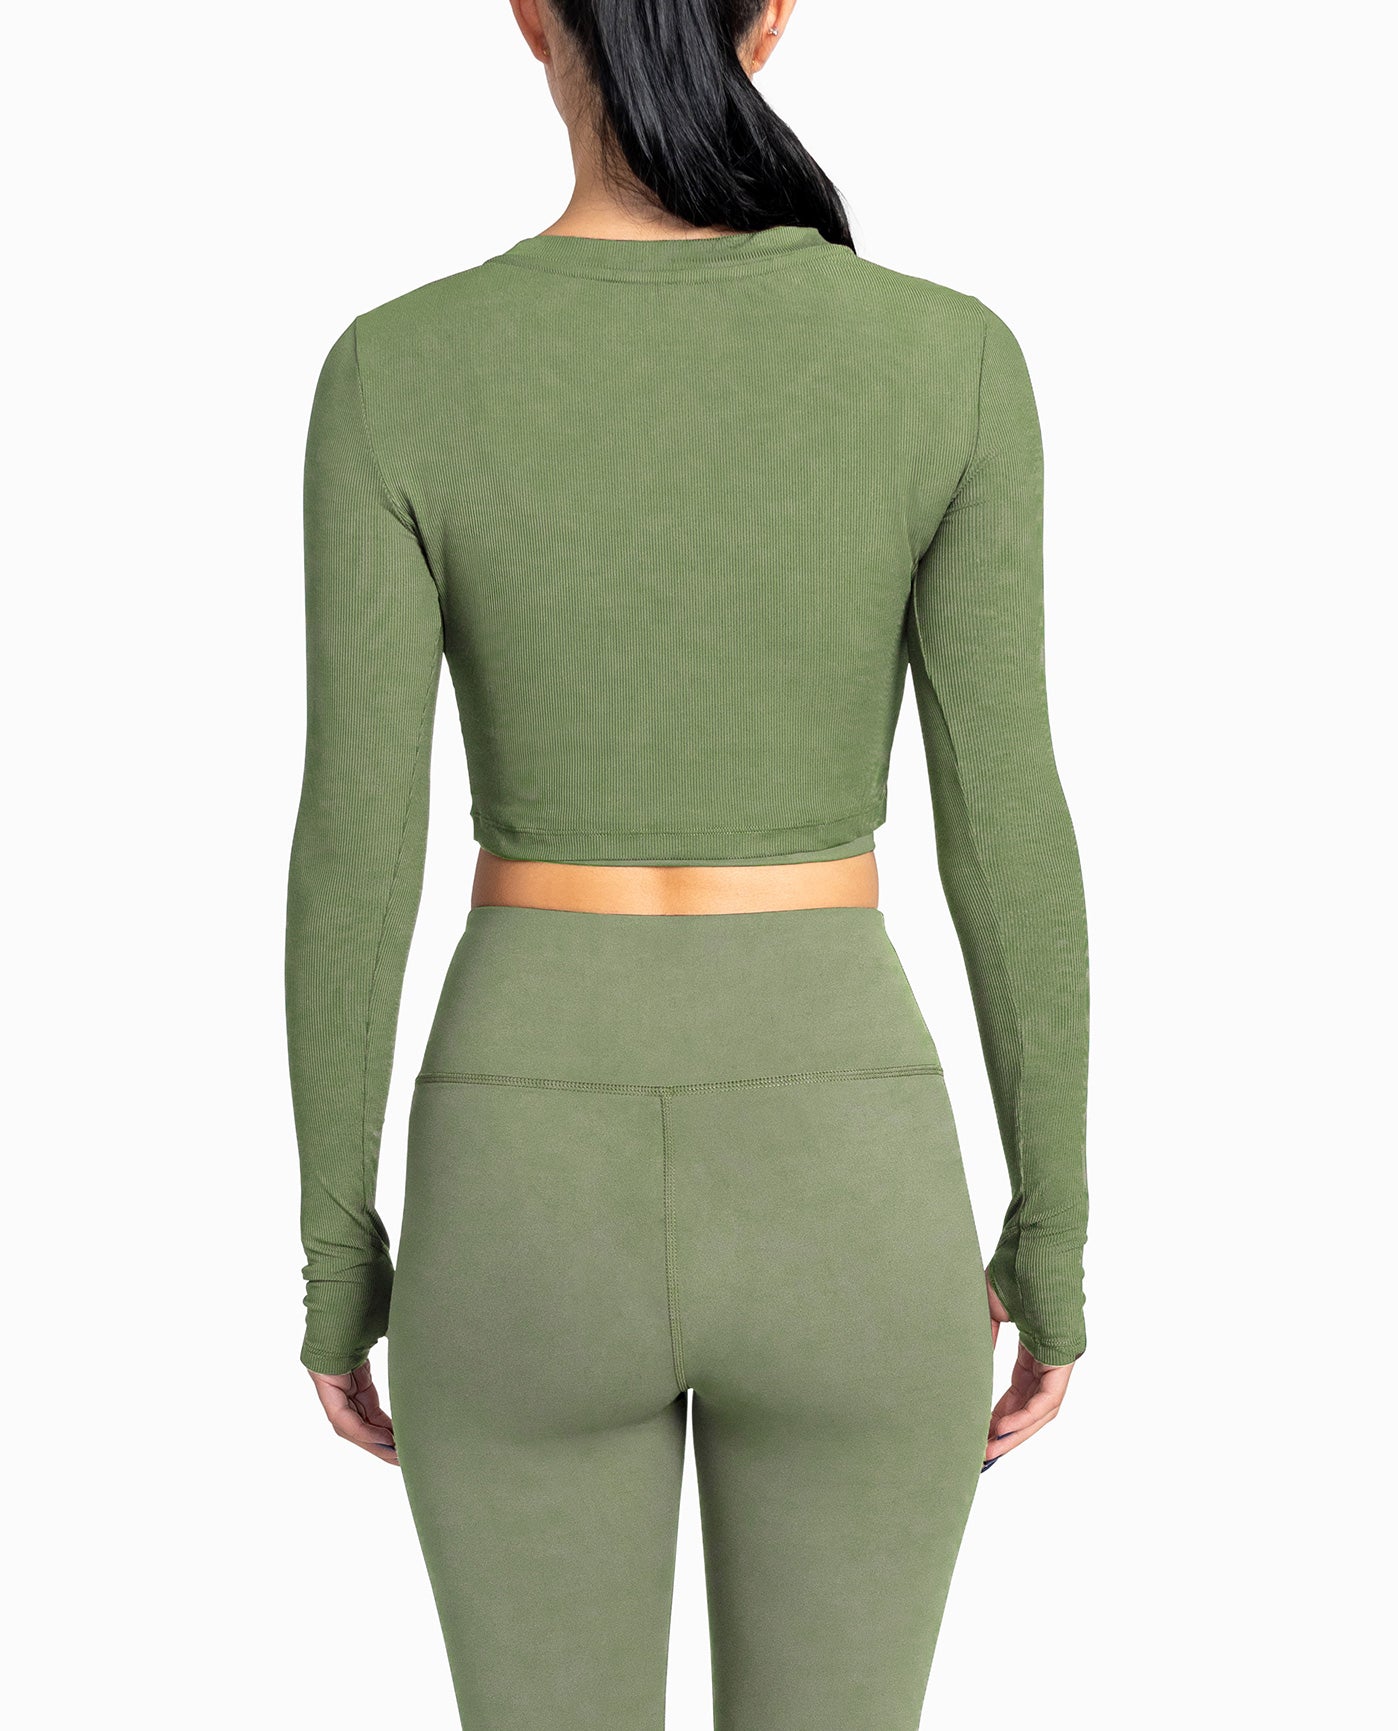 BACK OF CROPPED ACTIVE LONG SLEEVE TOP | Olive